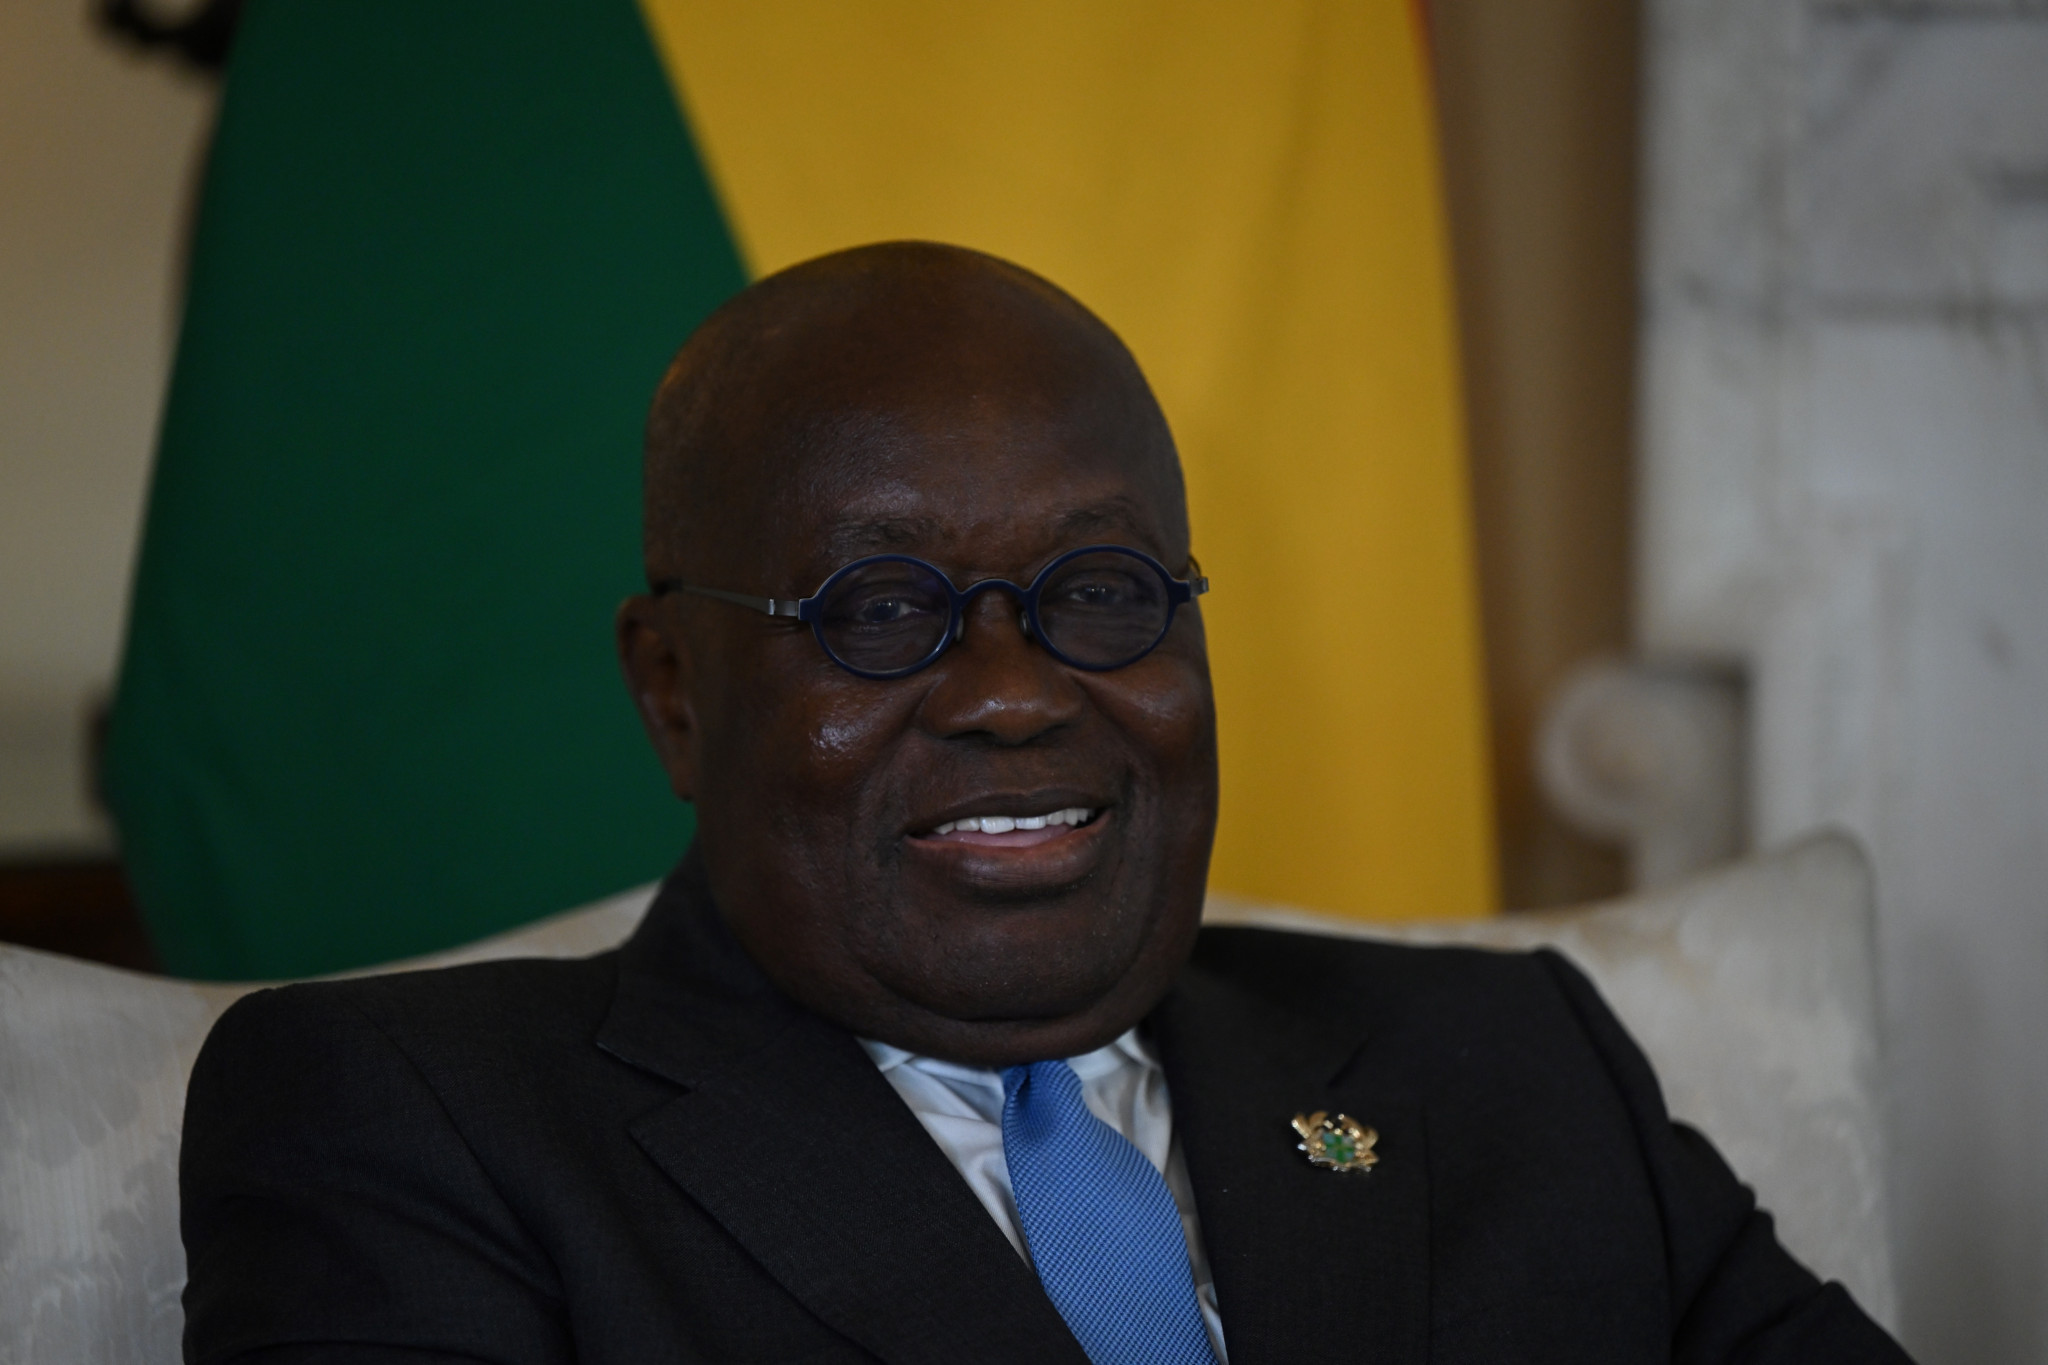 Ghanaian President Nana Addo Dankwa Akufo-Addo facilitated a meeting between three sports bodies to try and solve an impasse that is hampering preparations for the Accra 2023 African Games ©Getty Images